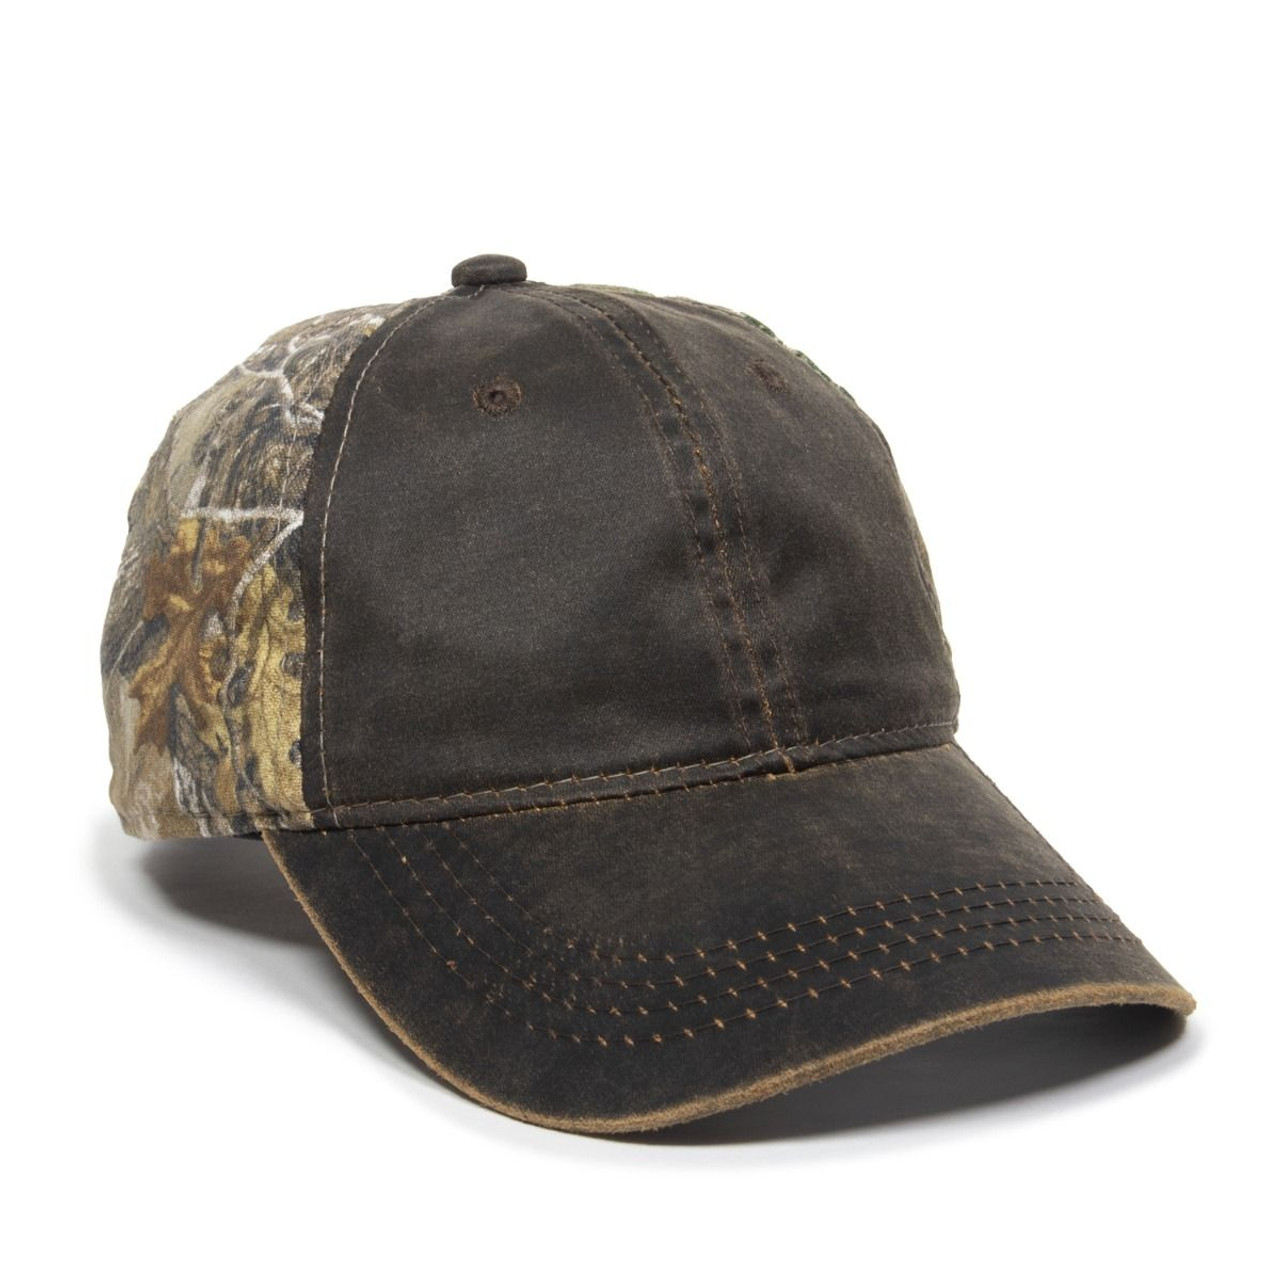 Promotional Weathered Cotton Twill Camo Hat